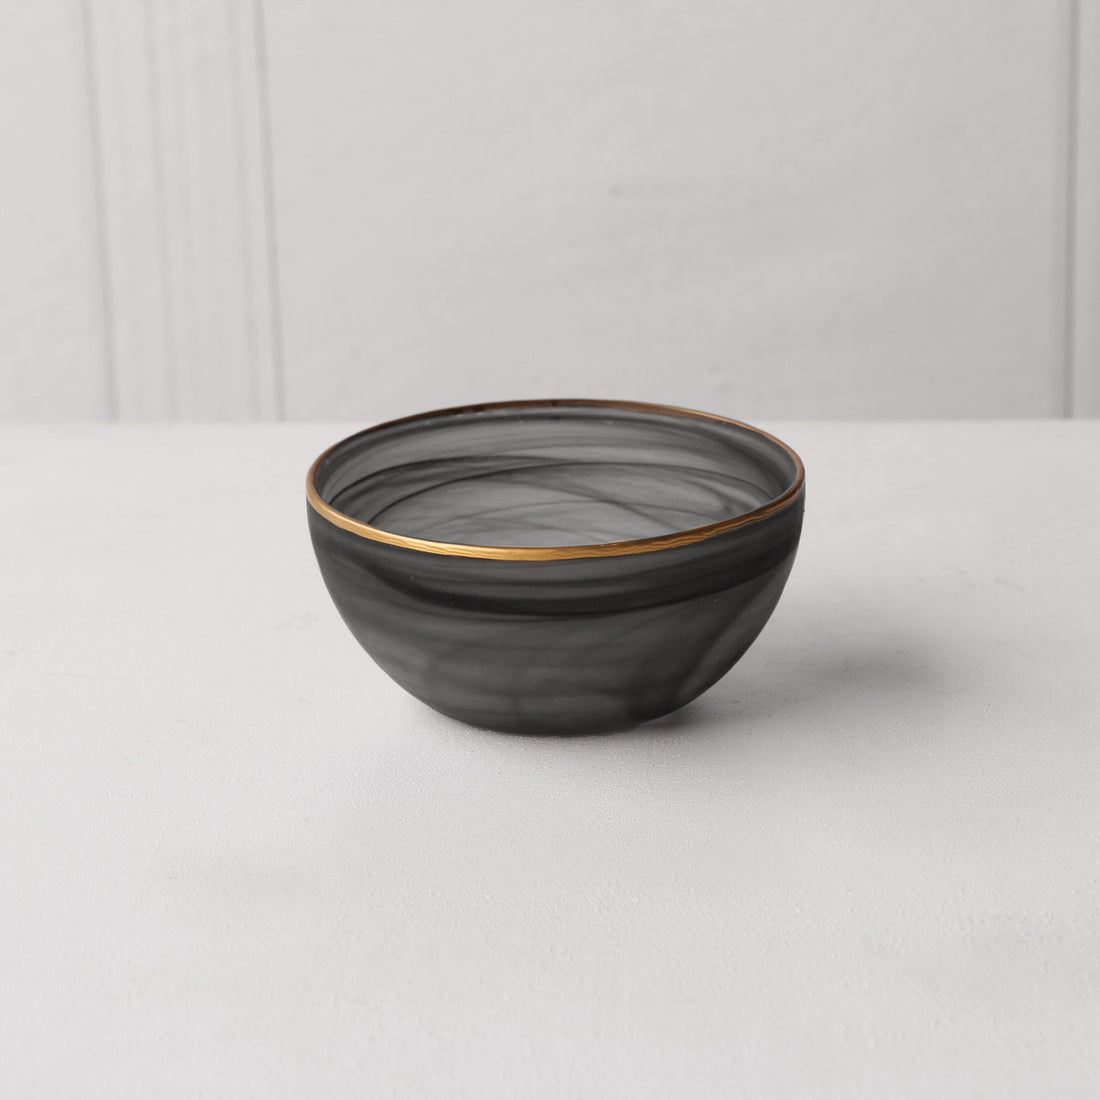 GLASS Frosted Black Alabaster Small Bowl with Gold Rim (Black and Gold)